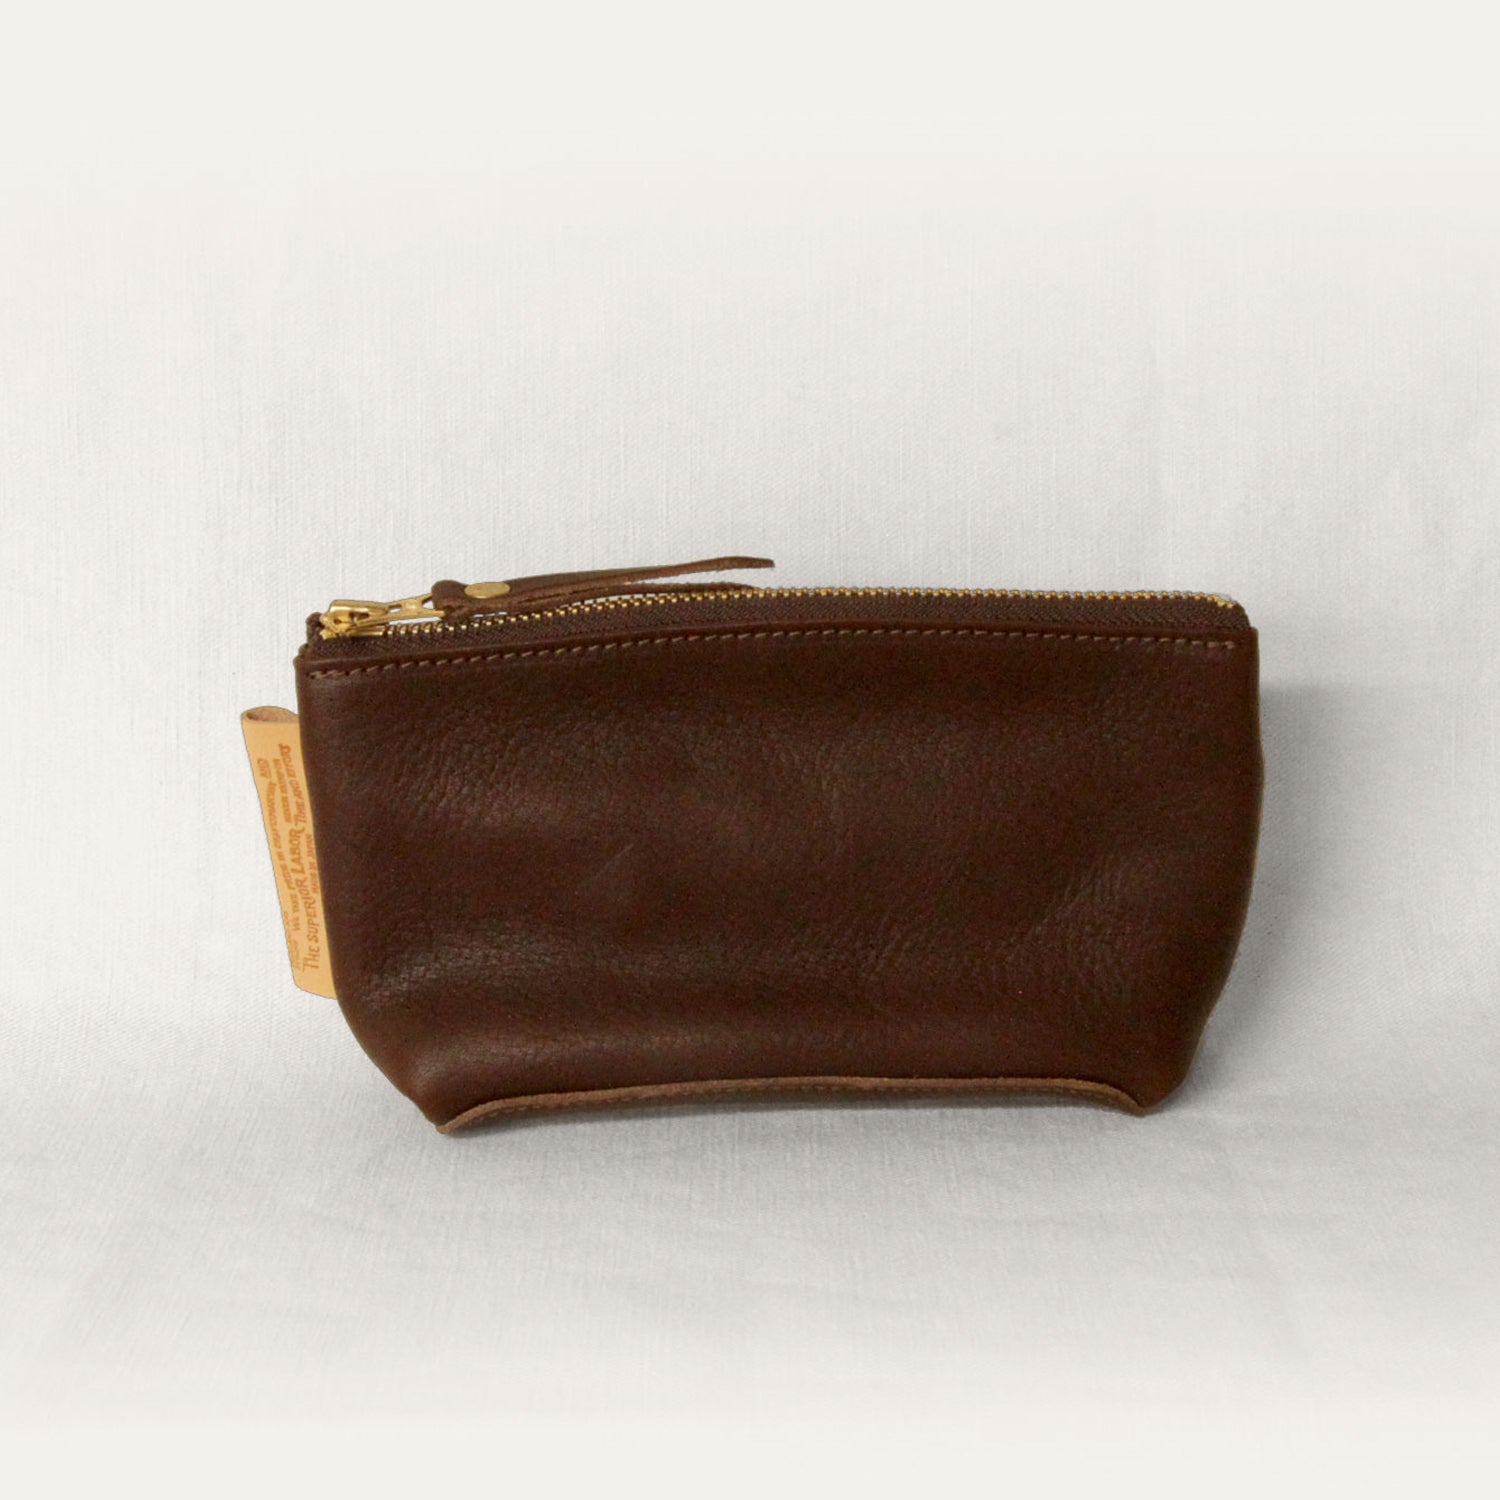 BG0022 leather pouch S